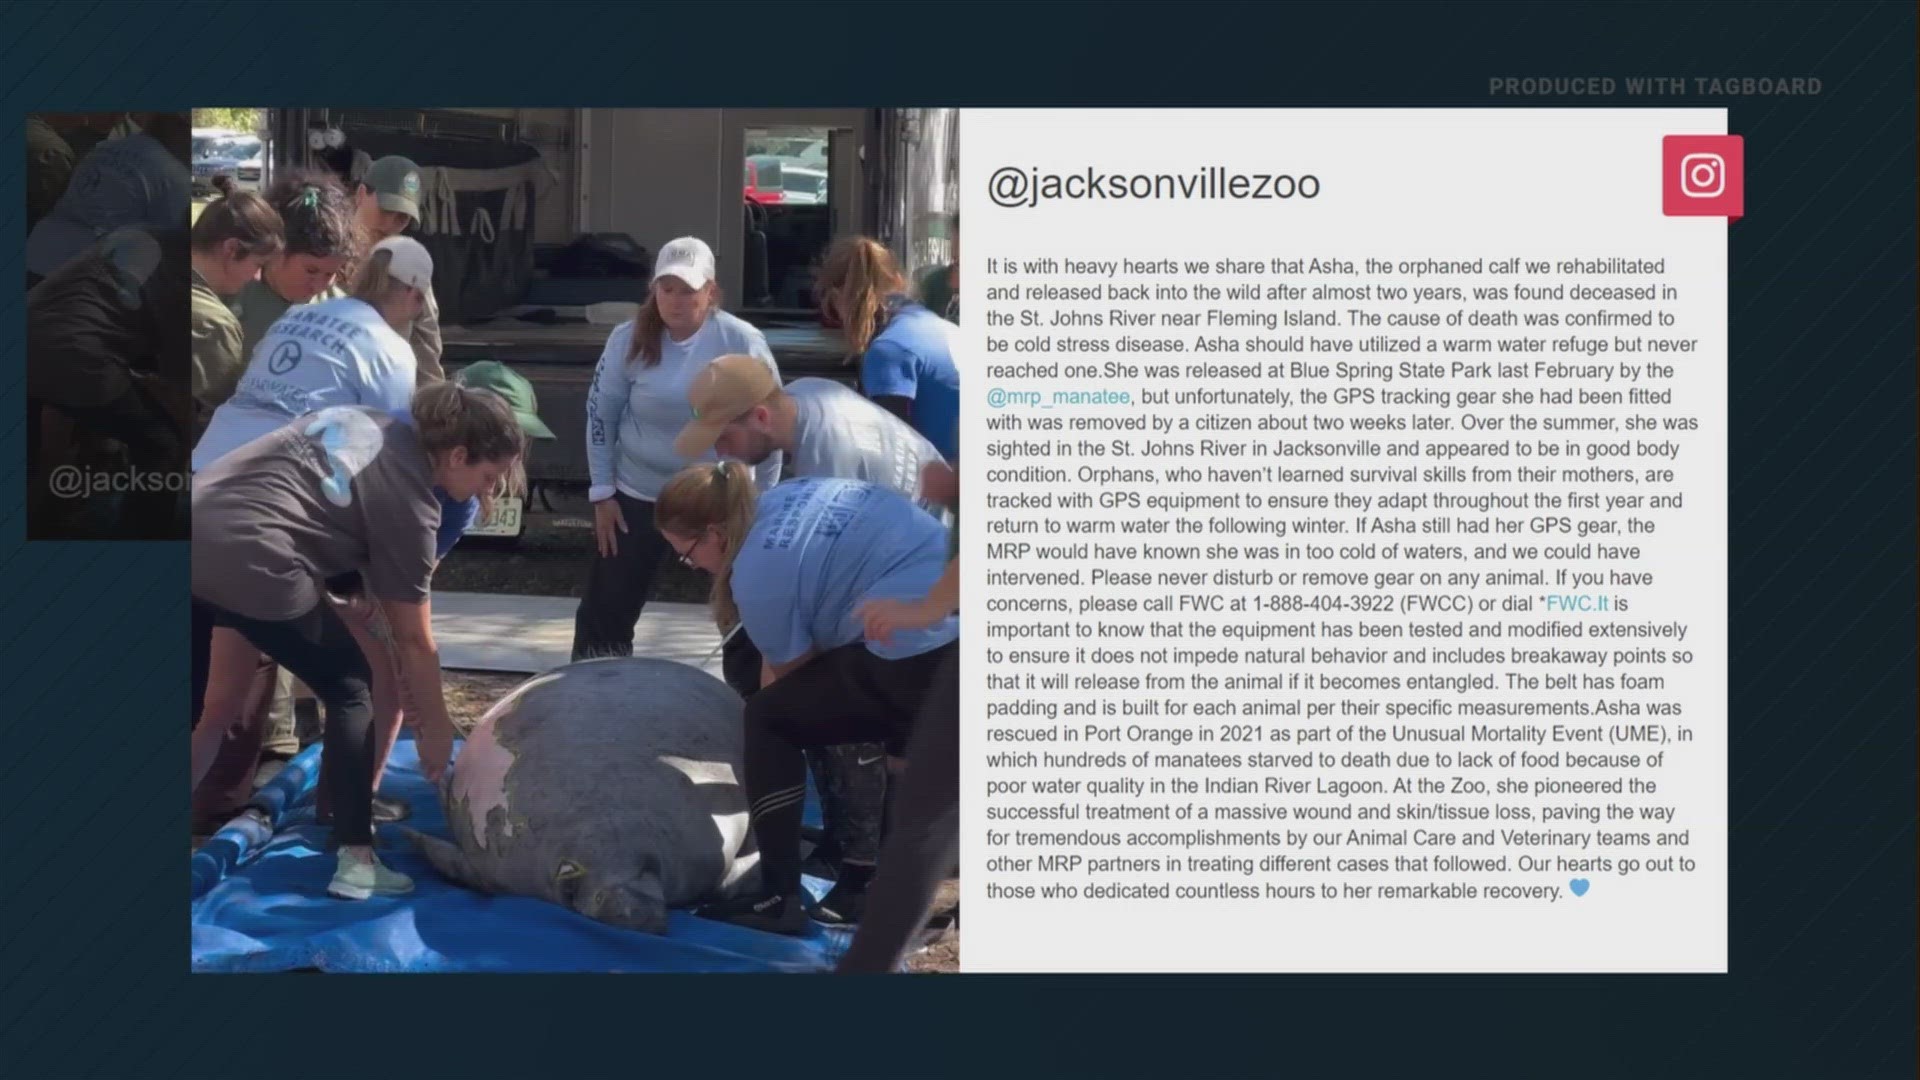 Nurtured by the Jacksonville Zoo & Gardens as an orphaned calf, Asha was found dead in the St. Johns River near Fleming Island.